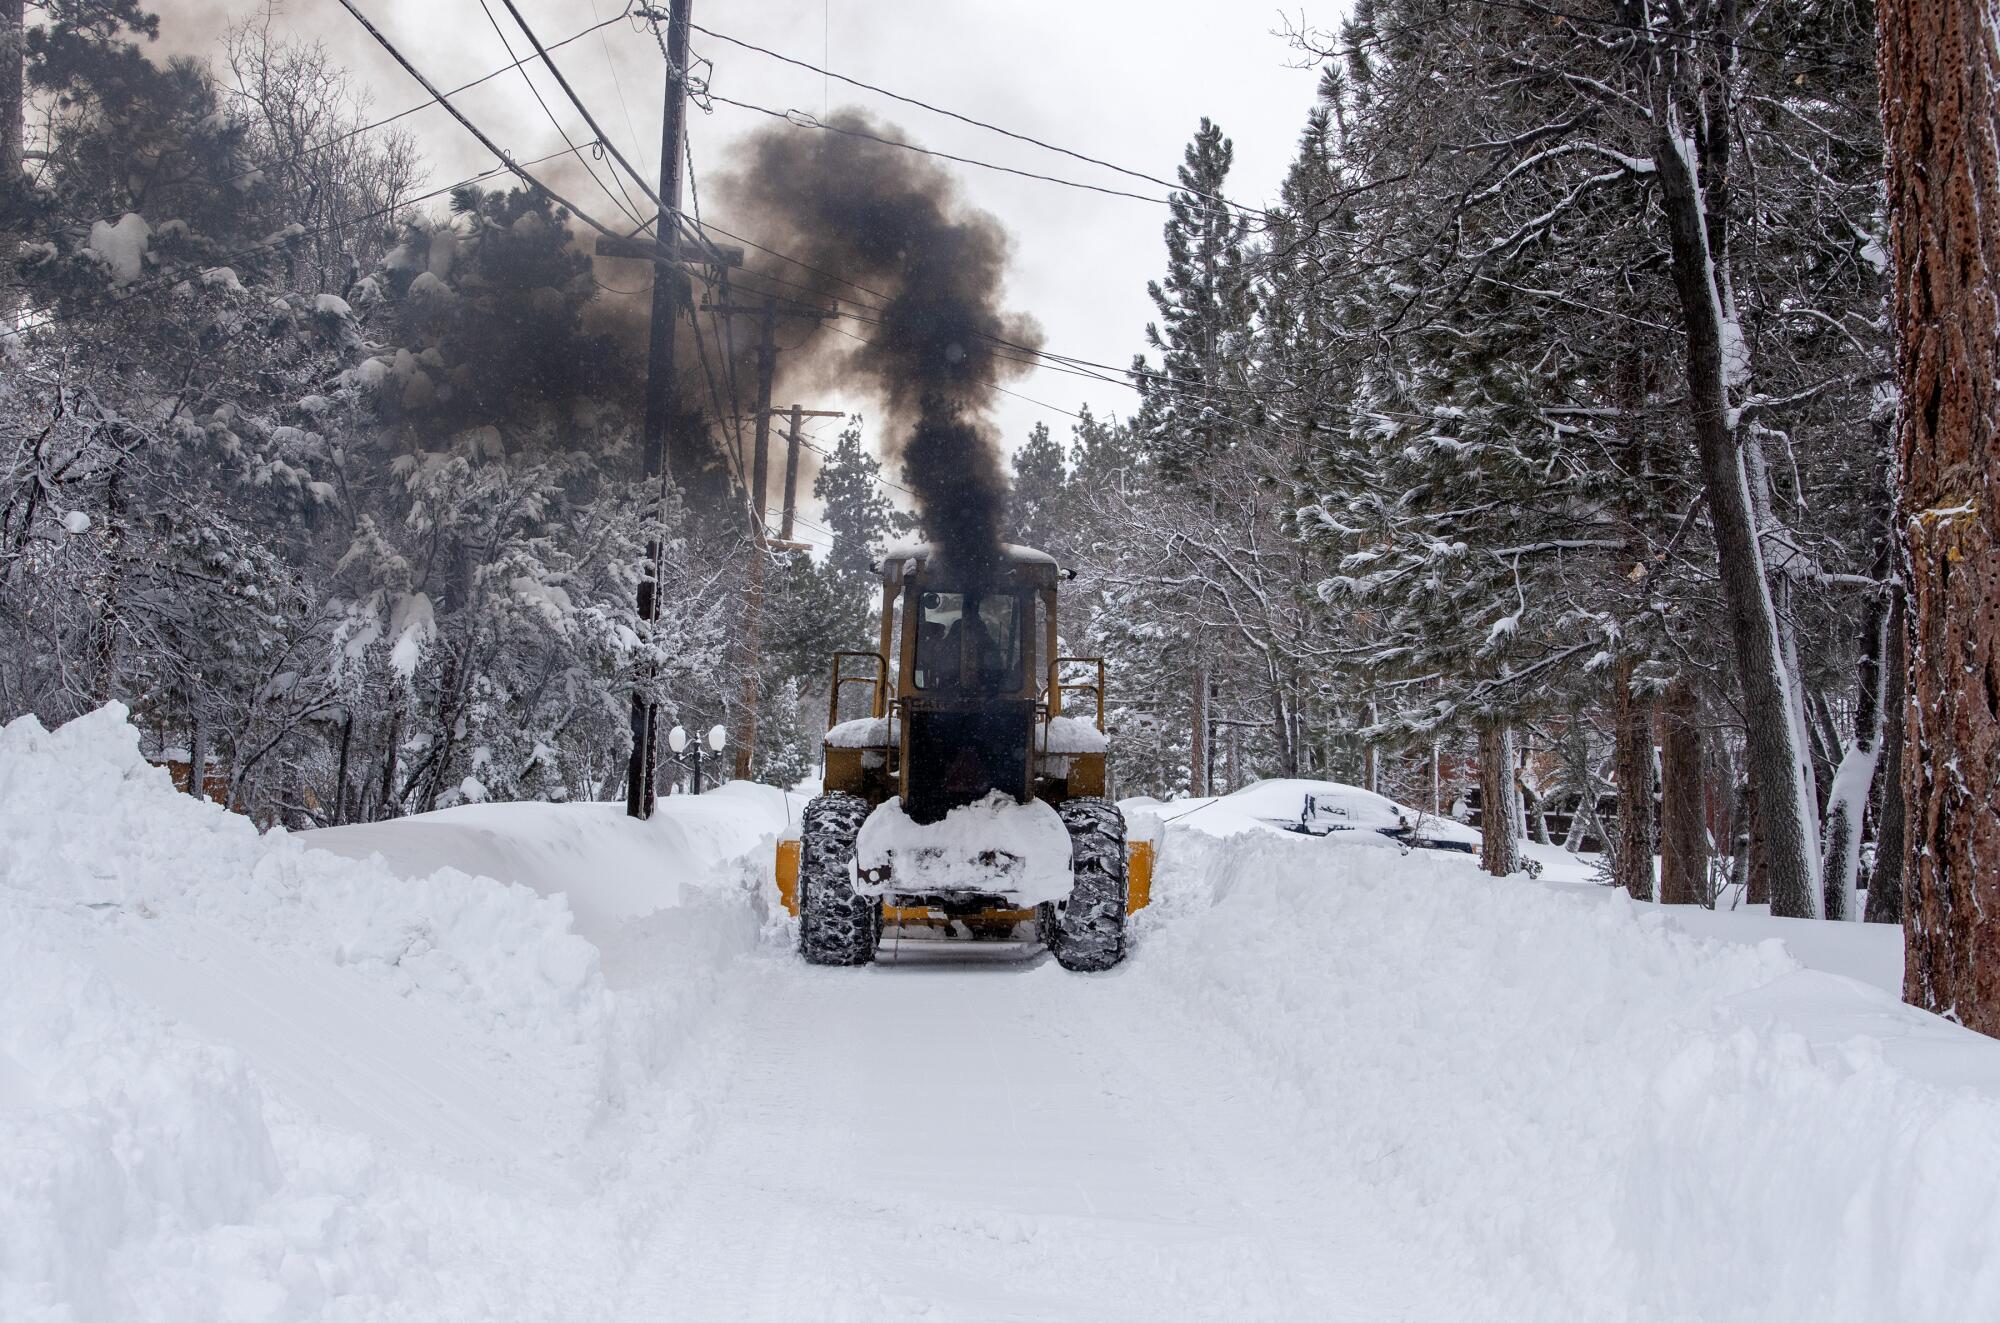 A snowplow belches black smoke as the driver clears a path for vehicles past homes inundated with snow in Sugarloaf.